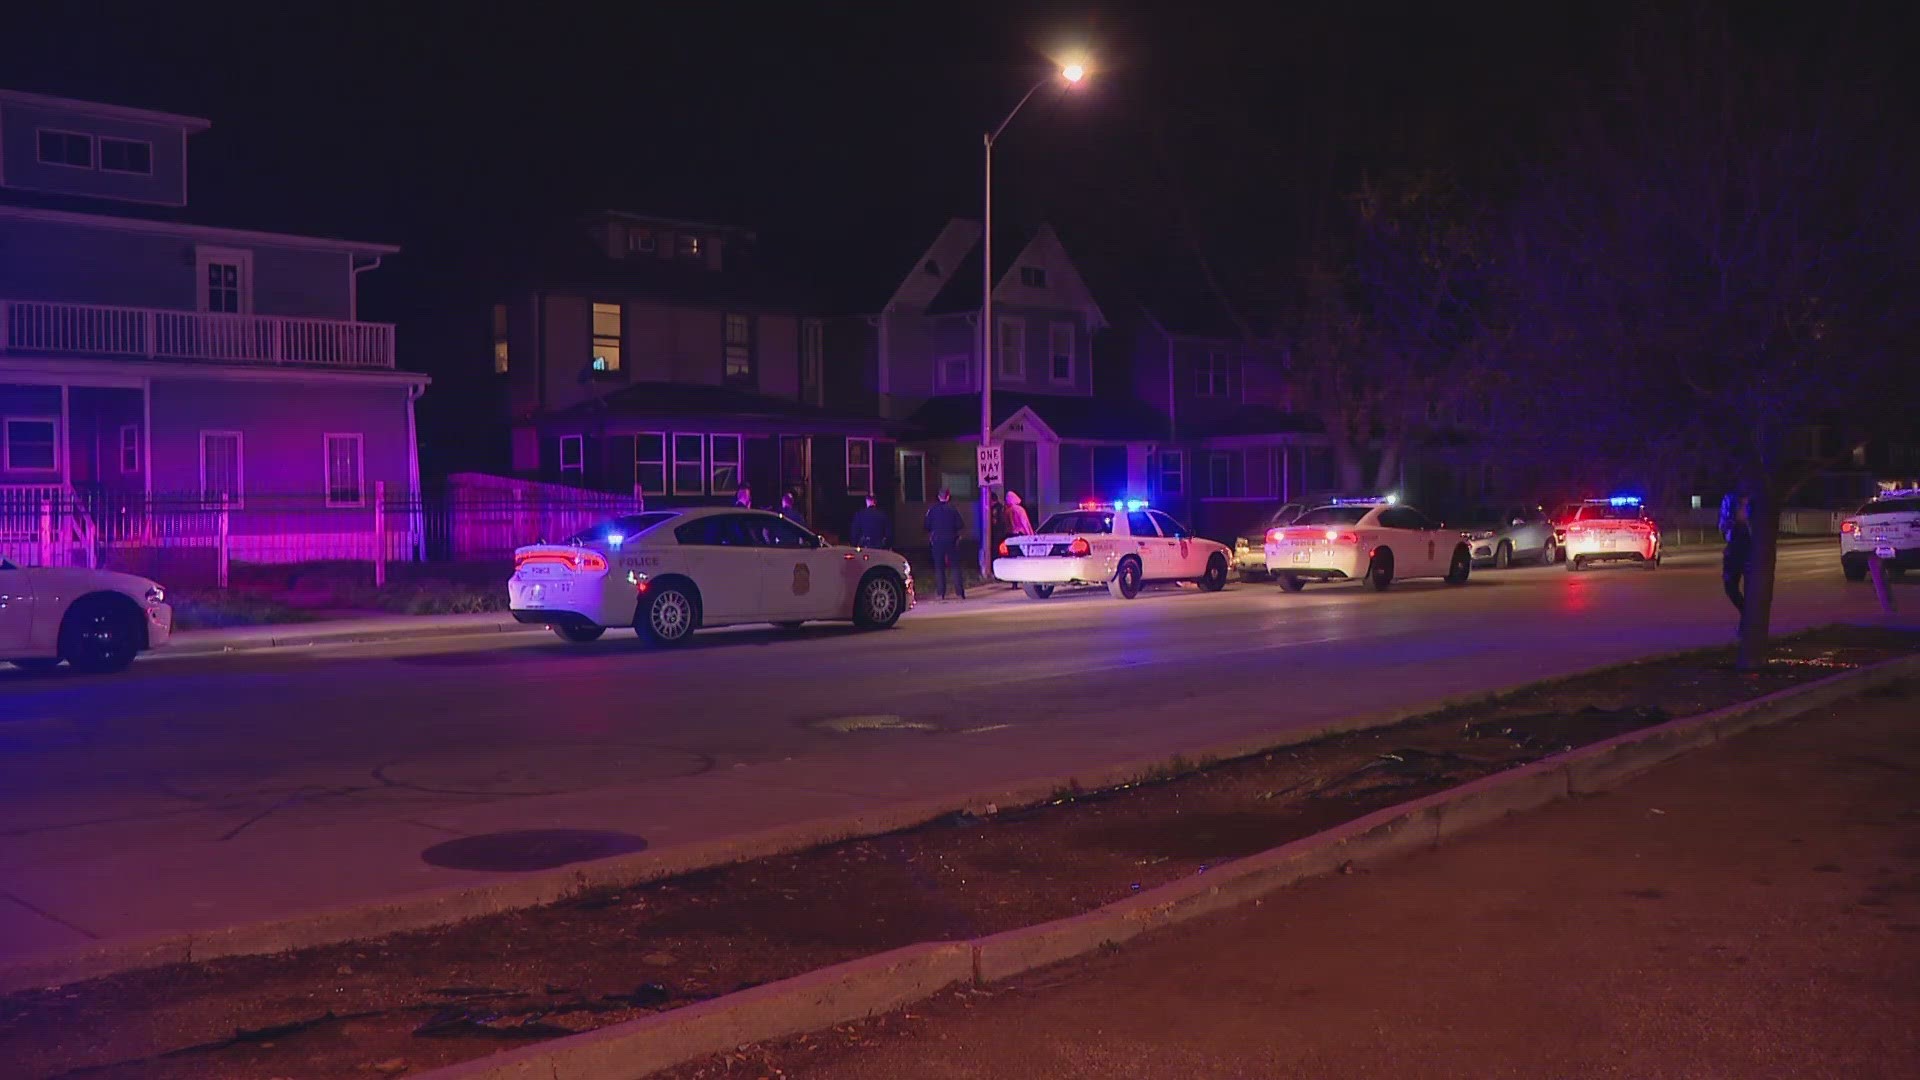 Police say two people stabbed each other in what police are calling a domestic-related incident.